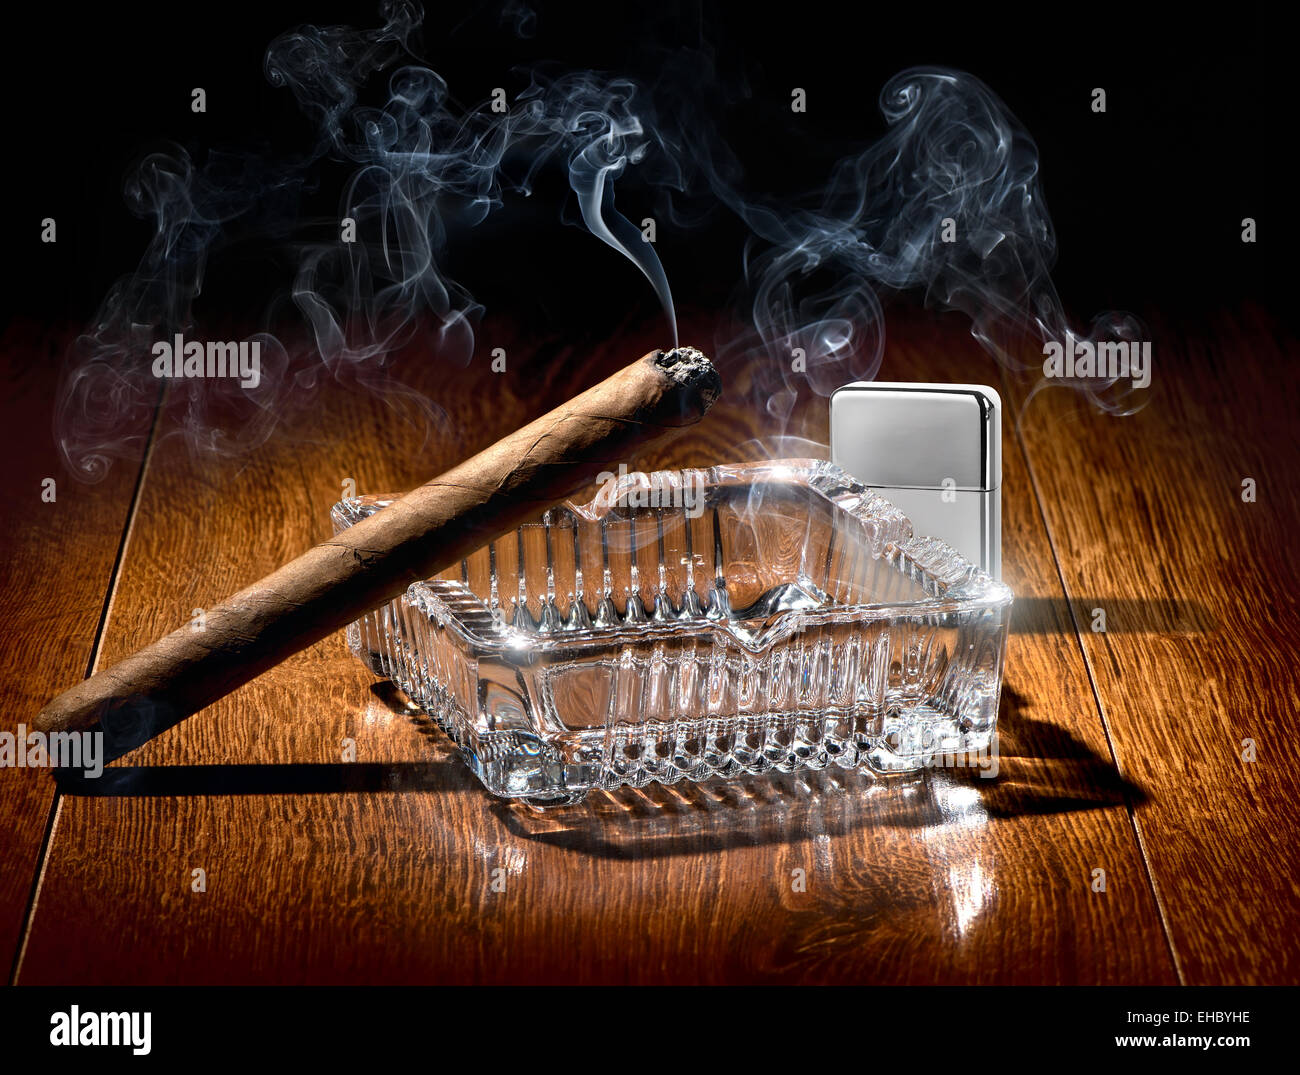 Cigar on ashtray and silver lighter on a wooden table Stock Photo